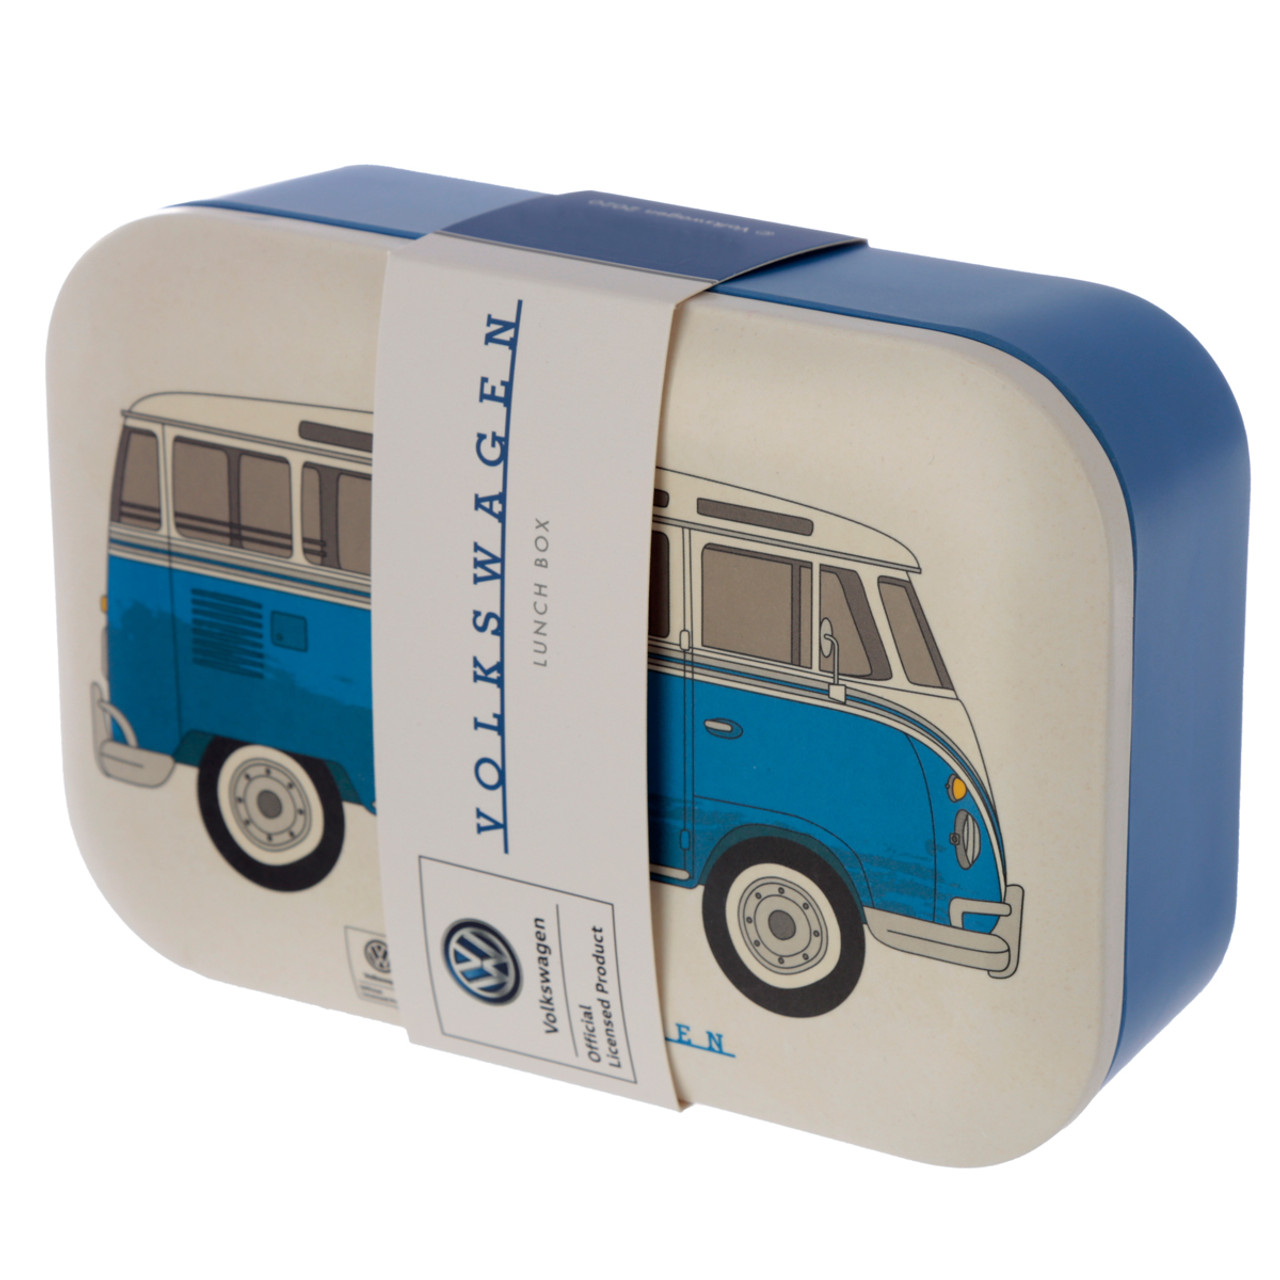 Apparel, Accessories and Unique Gifts for Volkswagen VW Enthusiasts – All  Things Vdub